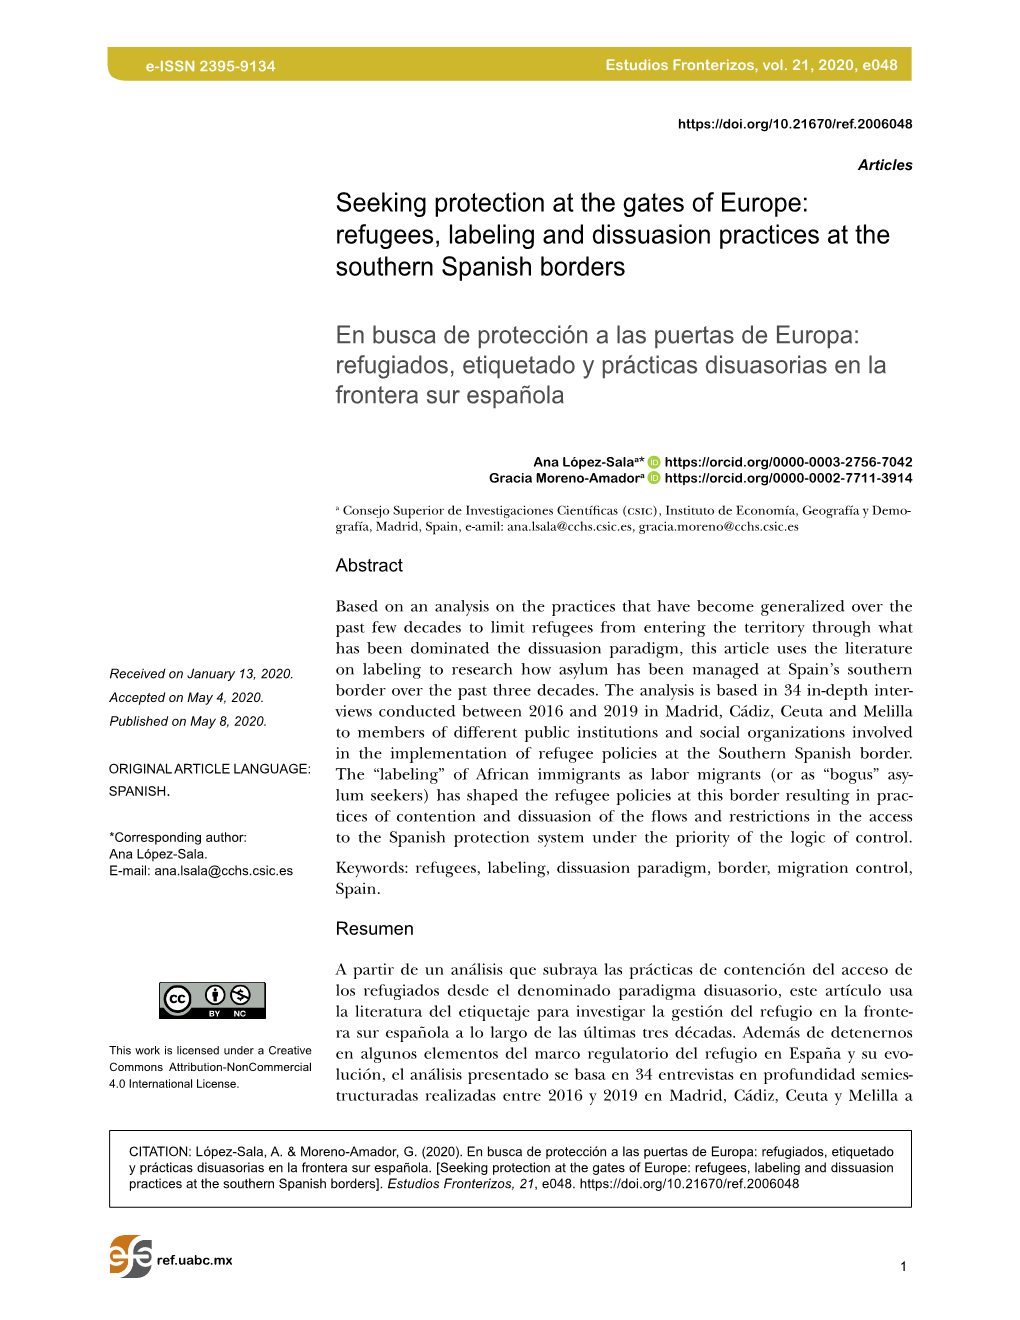 Seeking Protection at the Gates of Europe: Refugees, Labeling and Dissuasion Practices at the Southern Spanish Borders